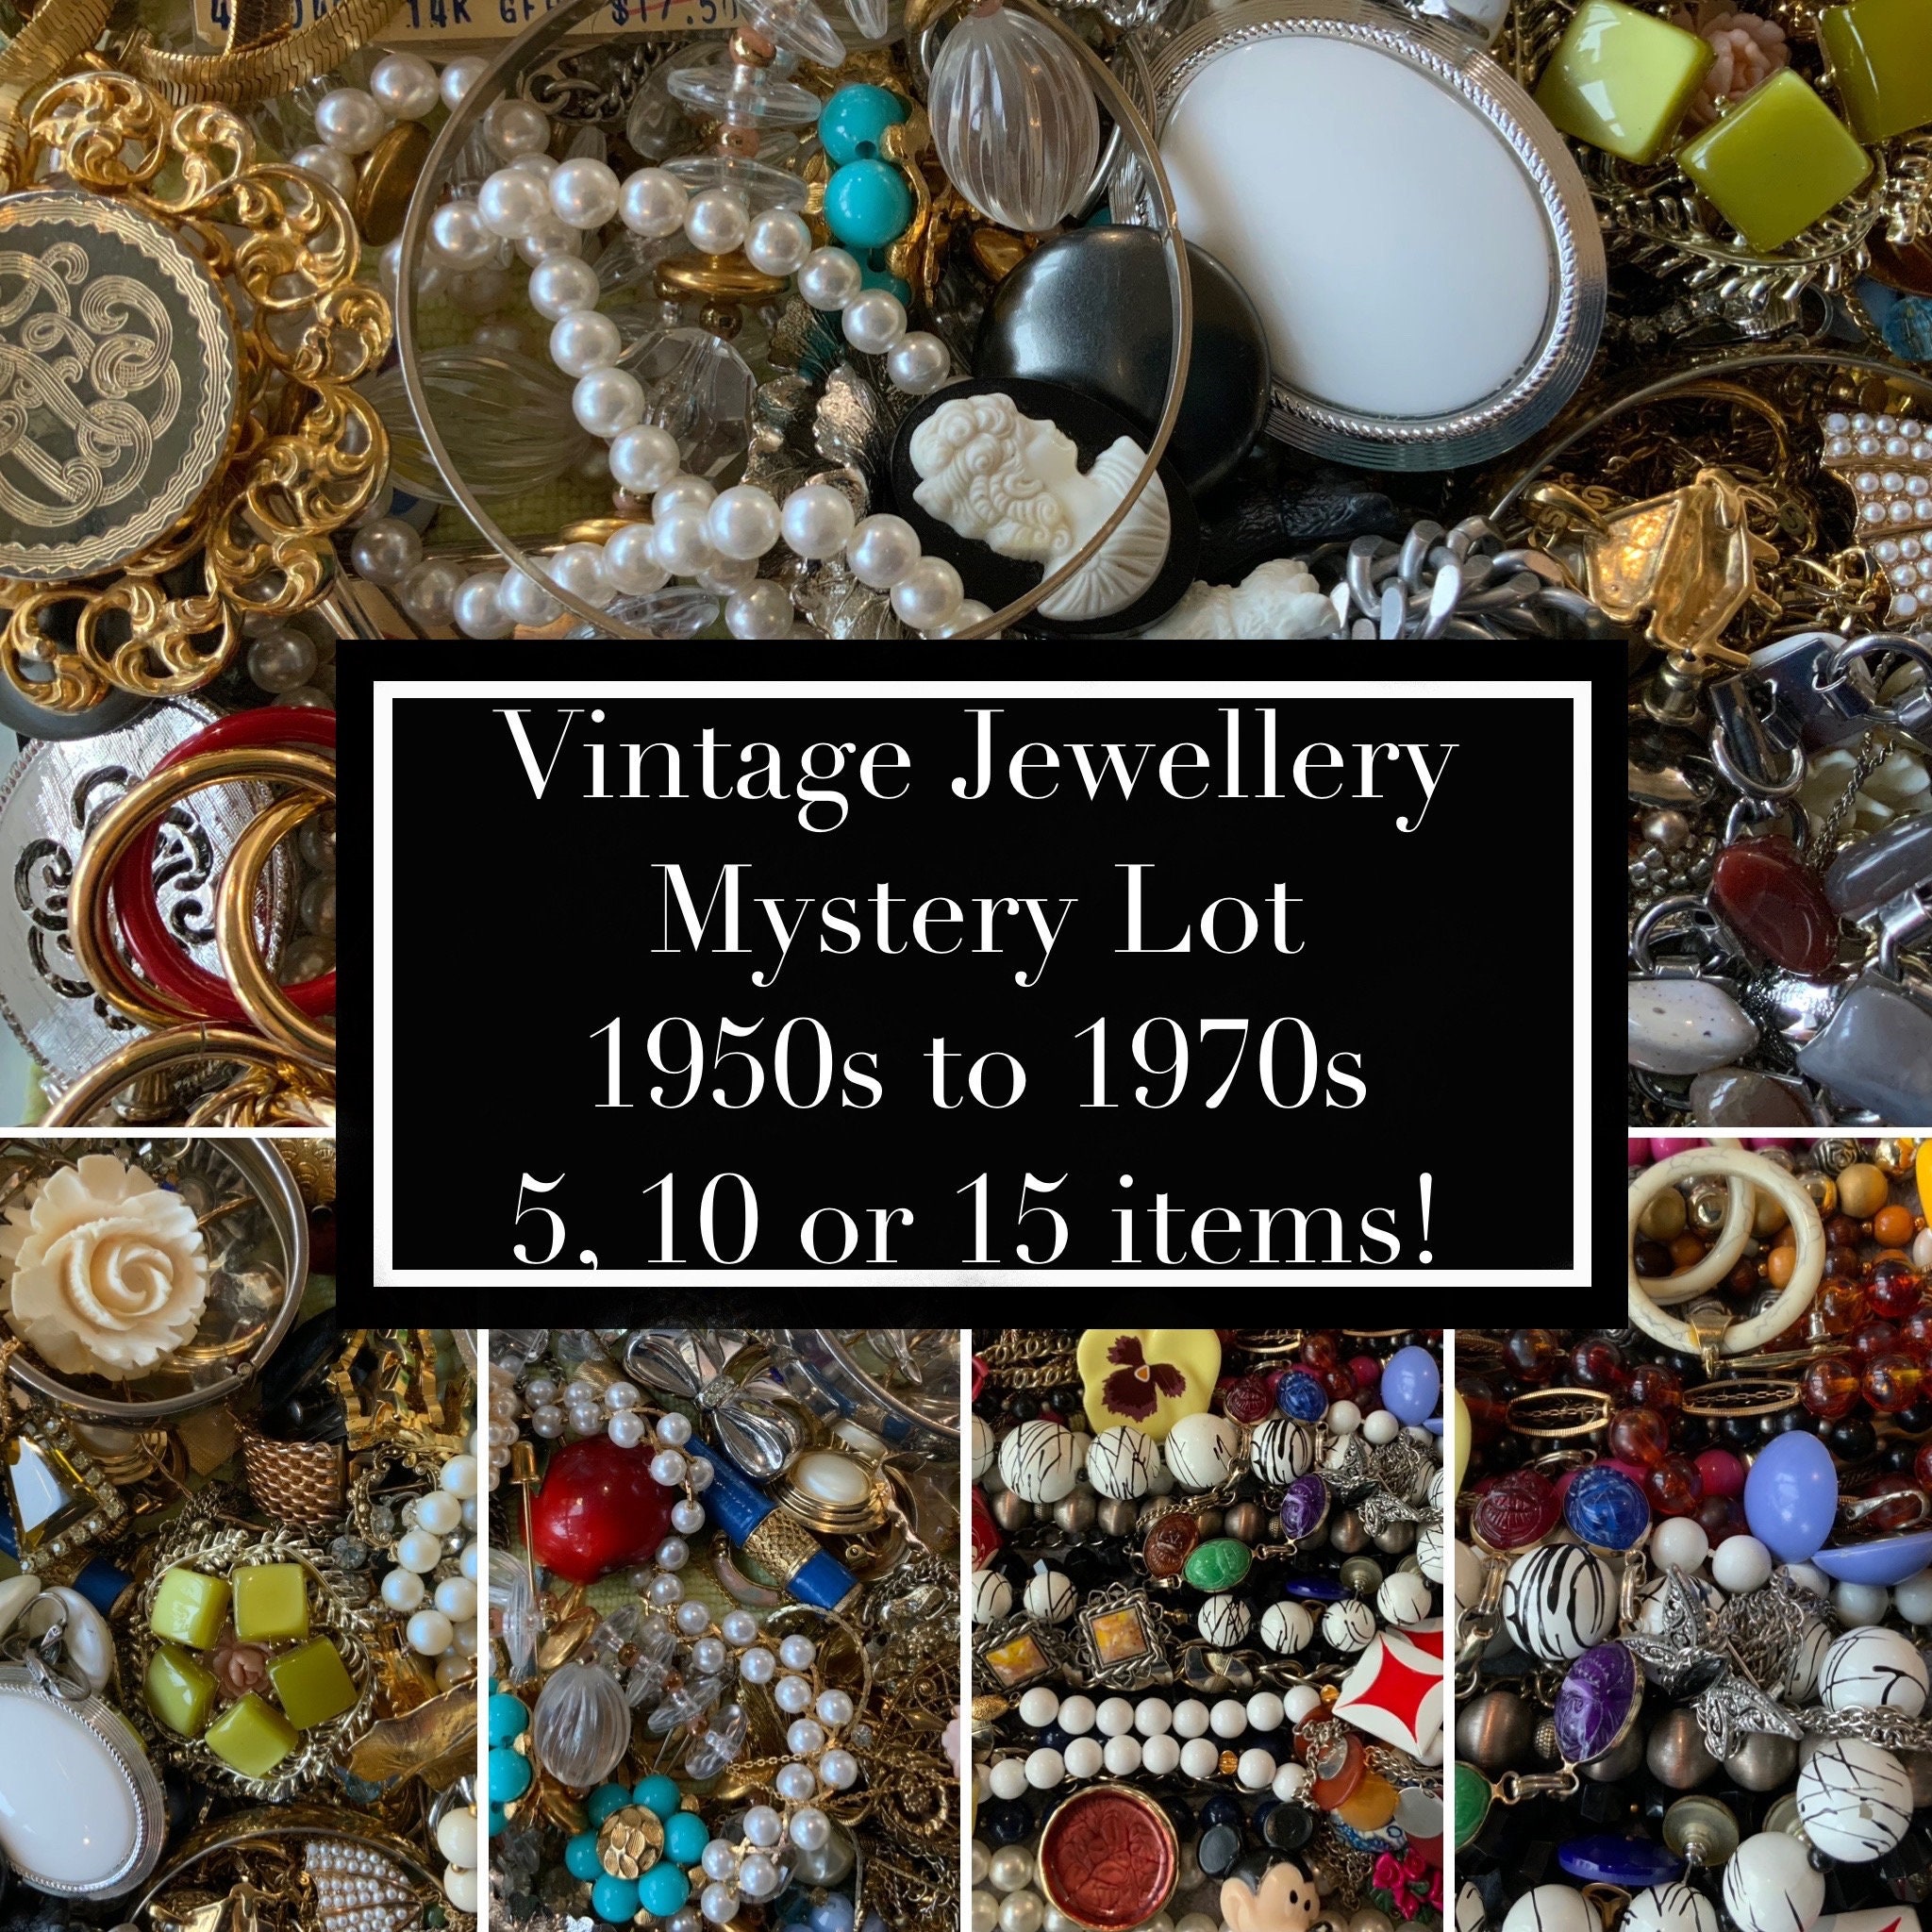 Irene48Treasures 25 Pieces of Vintage Jewelry - Mixed Lot in Very Good Wearable Condition. Necklaces, Earrings and Brooches